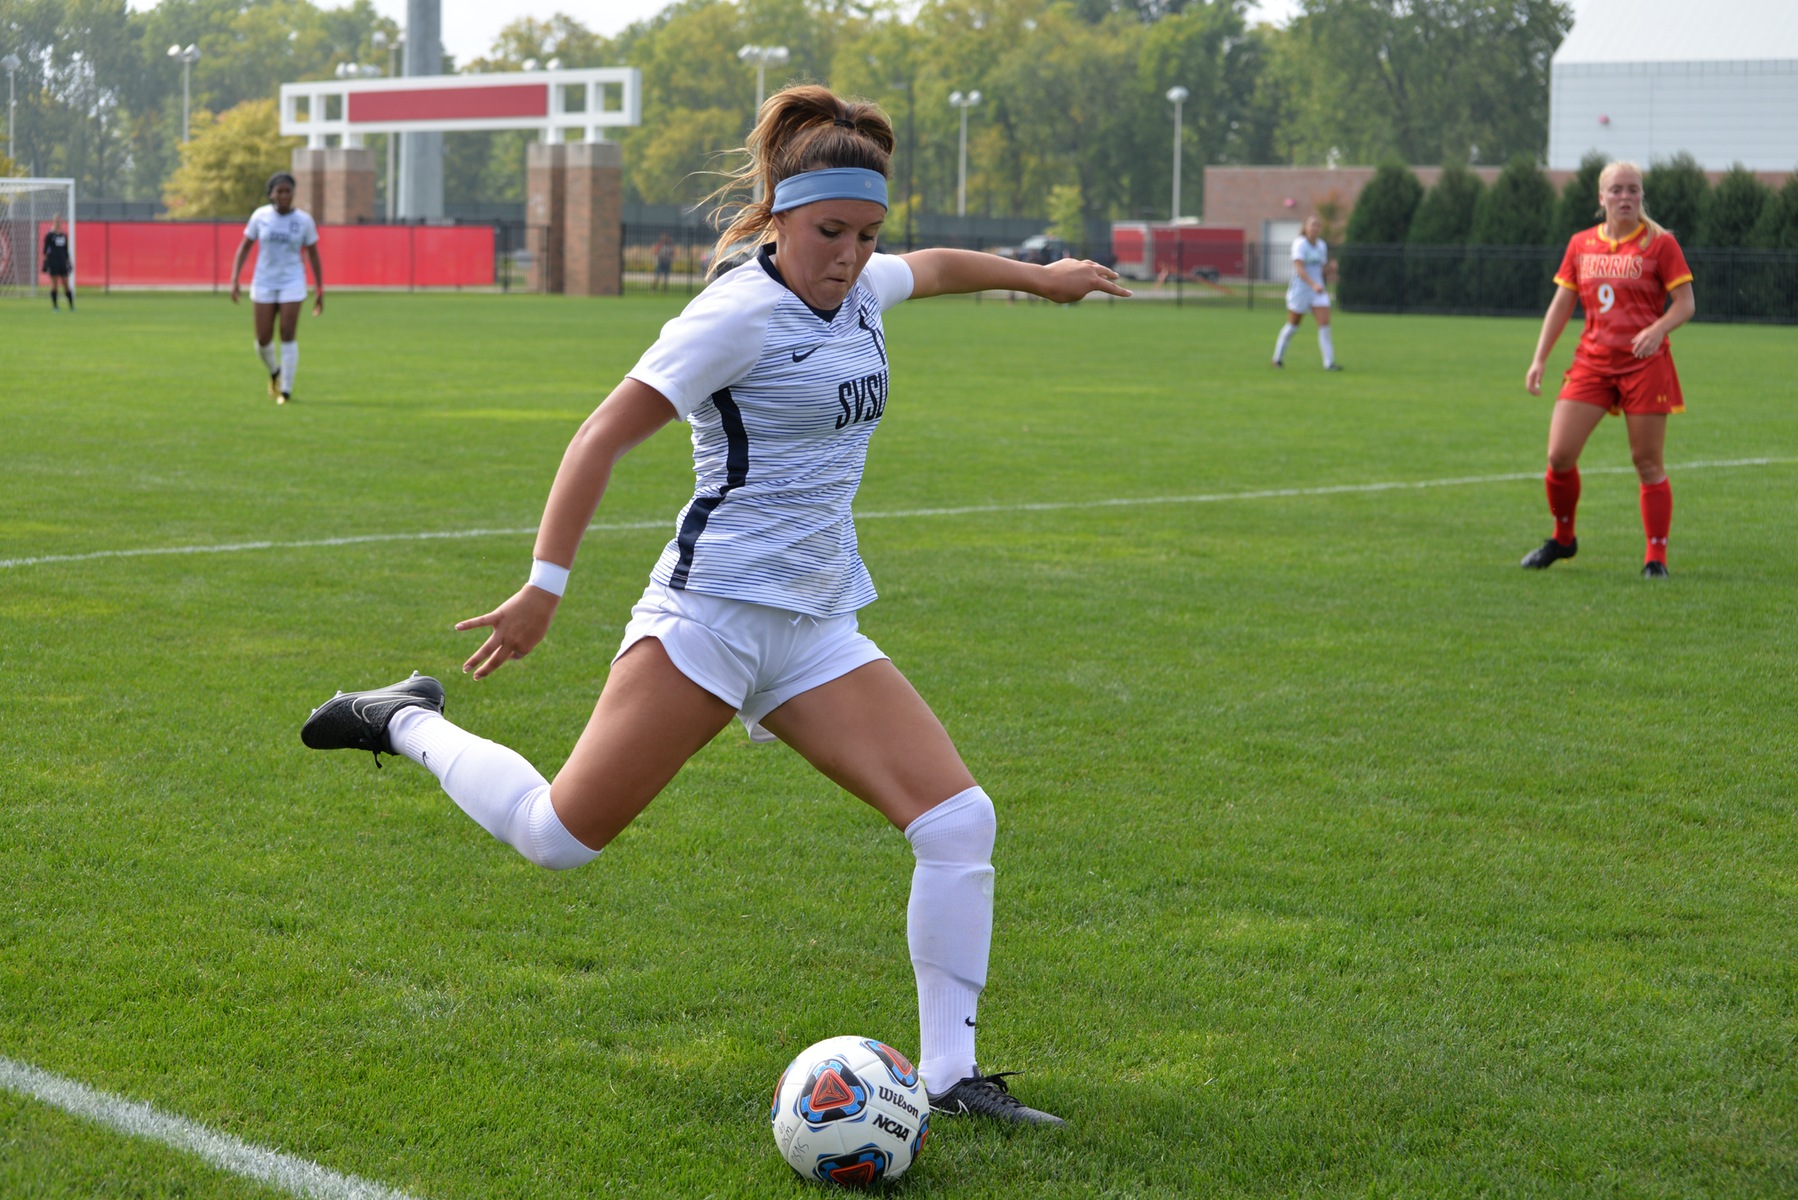 Saginaw Valley Falls in Regional Action to Ferris State, 2-1